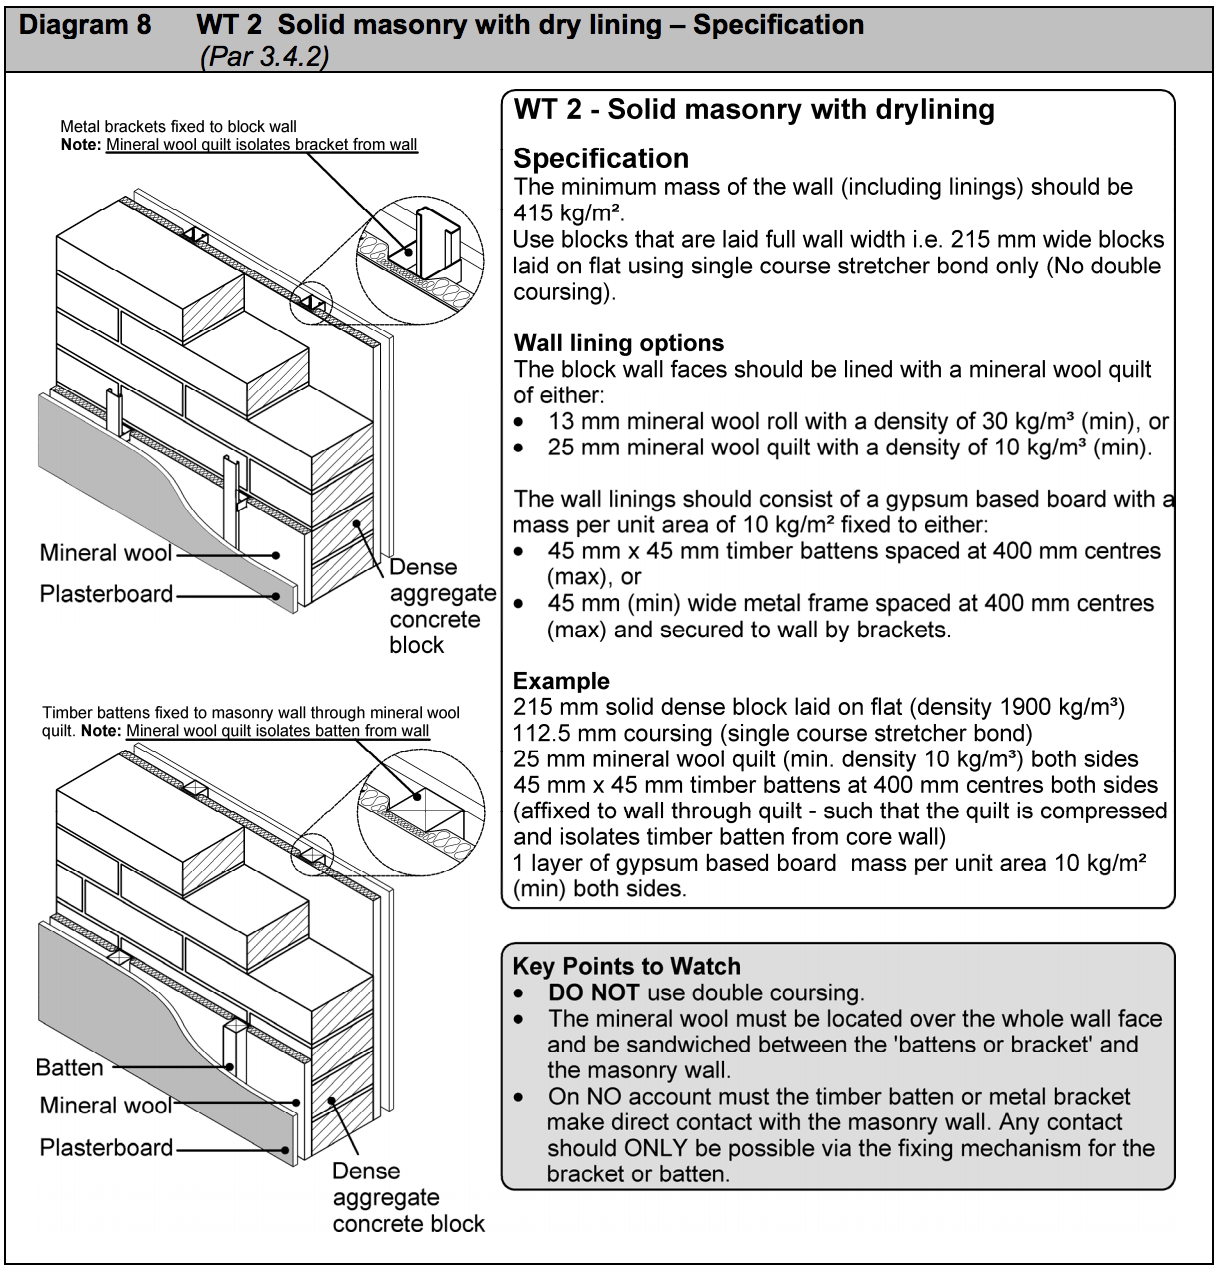 Diagram HE8 - WT 2 Solid masonry with dry lining - specification - Extract from TGD E